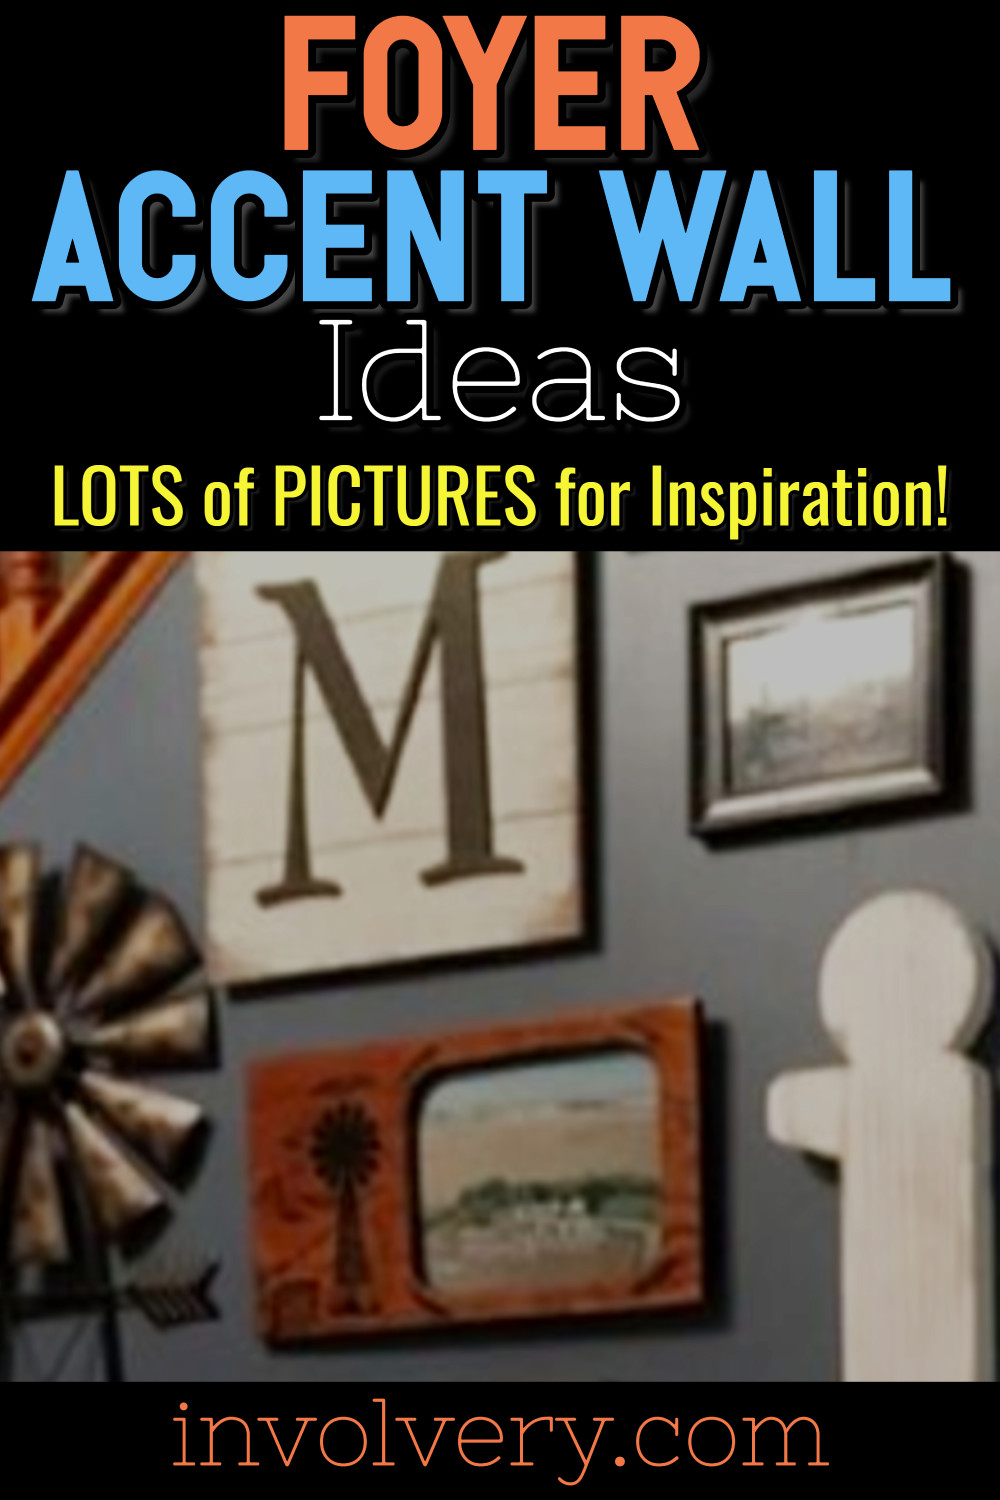 Foyer Accent Wall Ideas - Easy DIY decorating ideas for entry hall wall PICTURES and foyer decor inspiration to copy!  There's even photo wall ideas without frames for your entryway wall and staircase accent wall ideas.  All these foyer wall decor ideas are GORGEOUS and easy home decor ideas to dress up the entryway in your home. I really love the welcome wall decor for small foyers - so pretty!